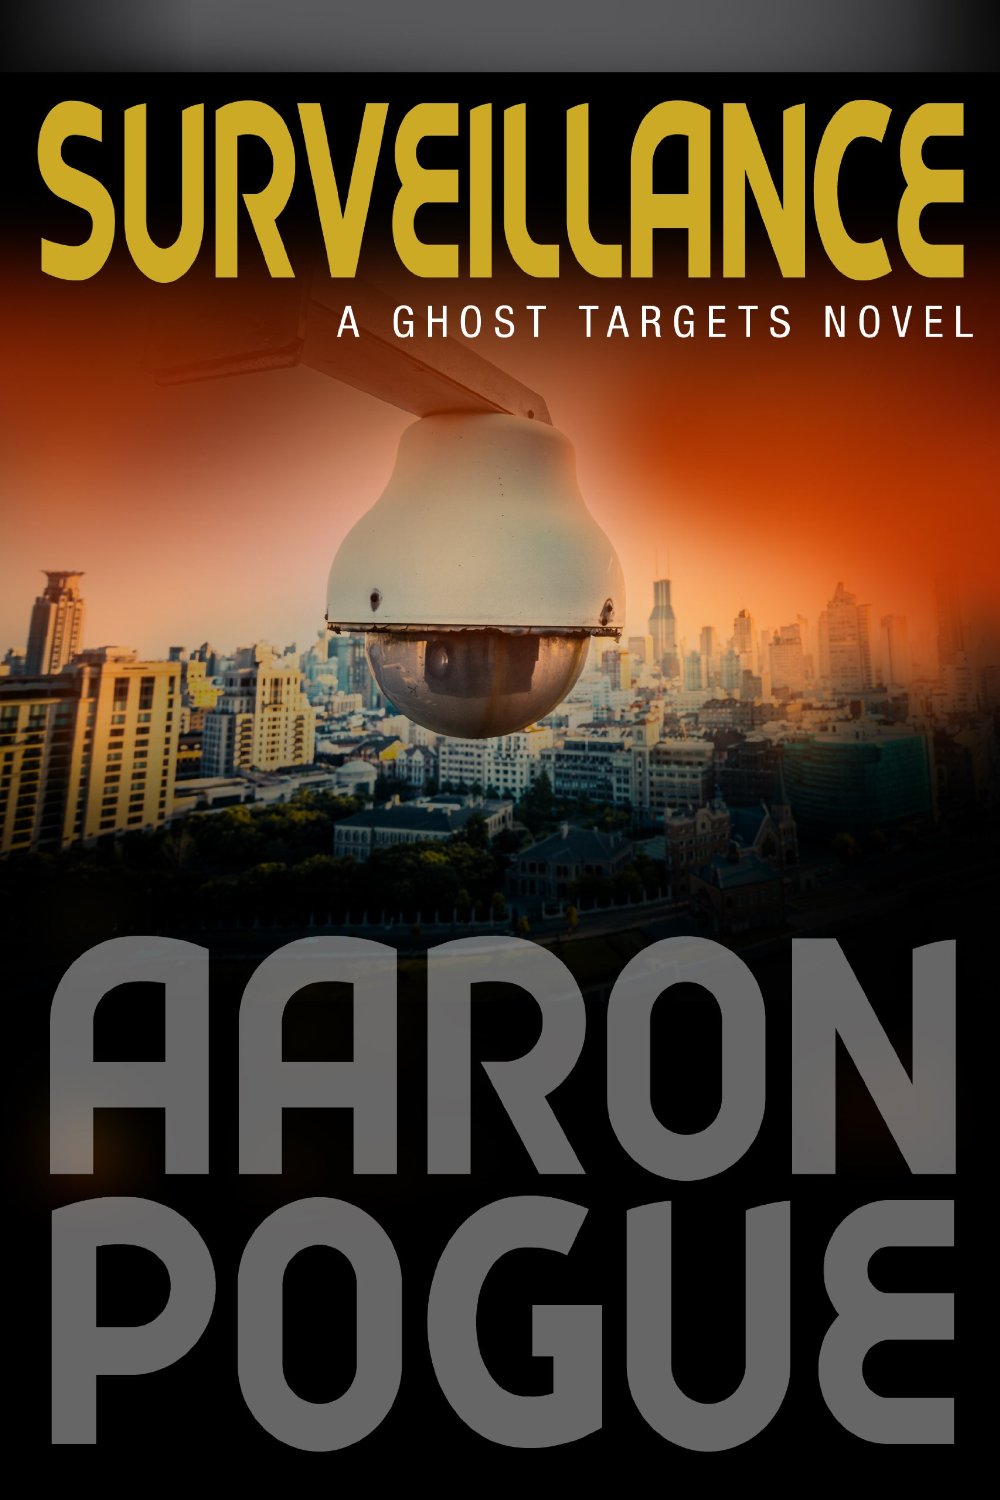 Surveillance (Ghost Targets Book 1) by Aaron Pogue